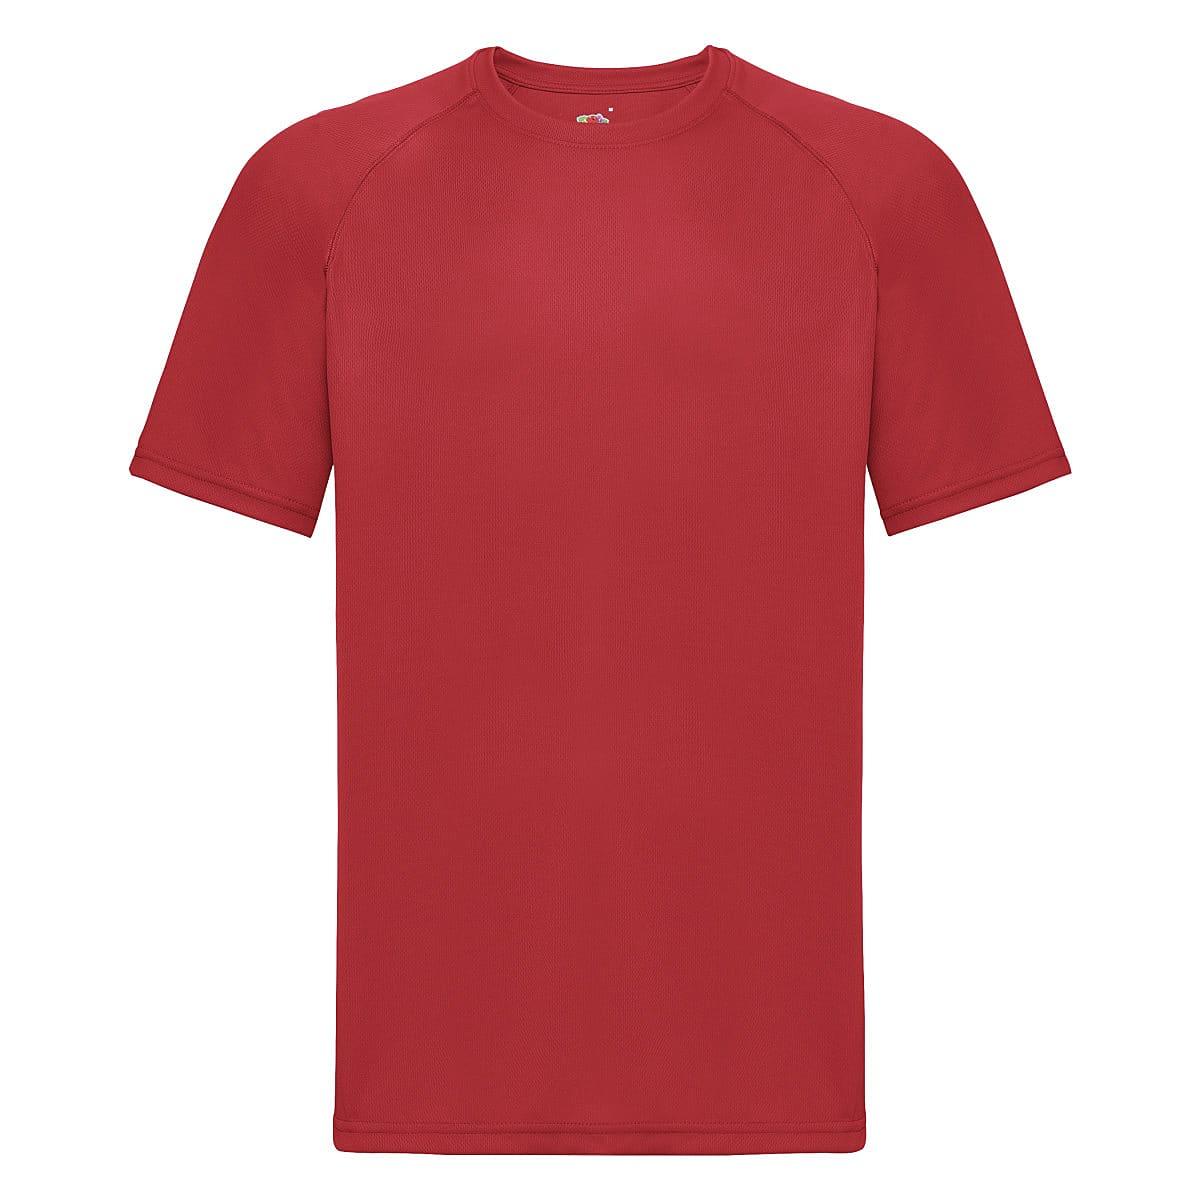 Fruit Of The Loom Mens Performance T-Shirt in Red (Product Code: 61390)